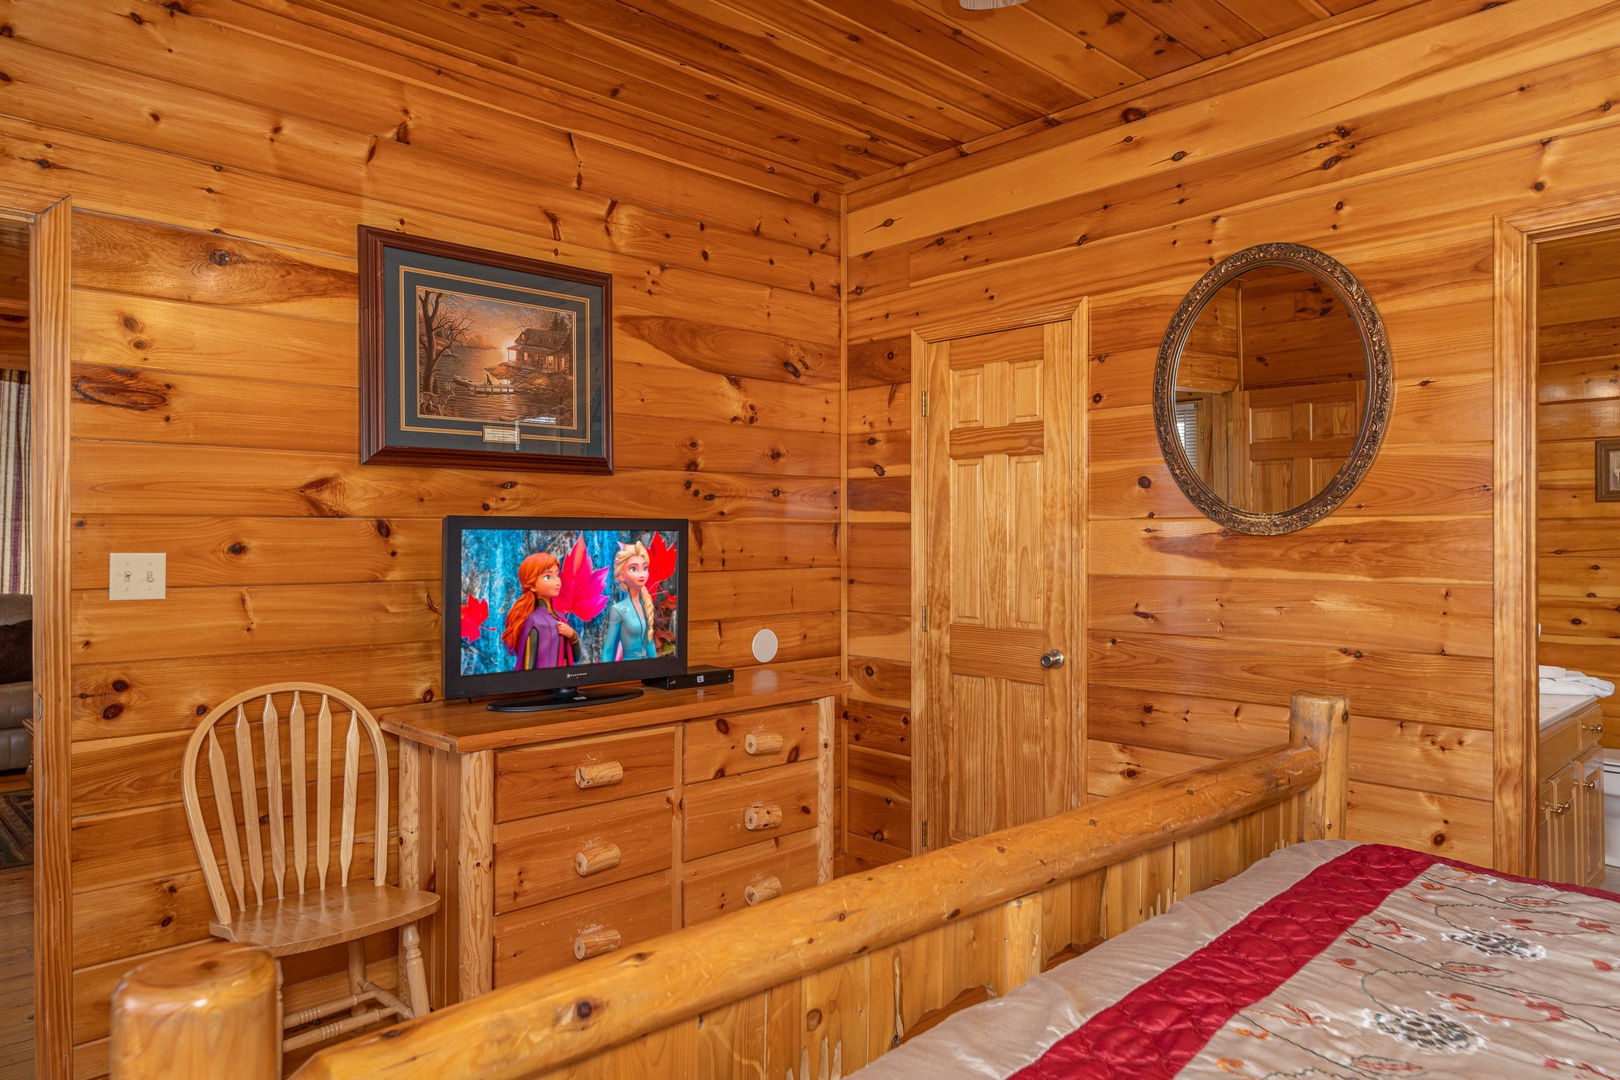 Dresser, TV, and chair in a bedroom at Hickernut Lodge, a 5-bedroom cabin rental located in Pigeon Forge